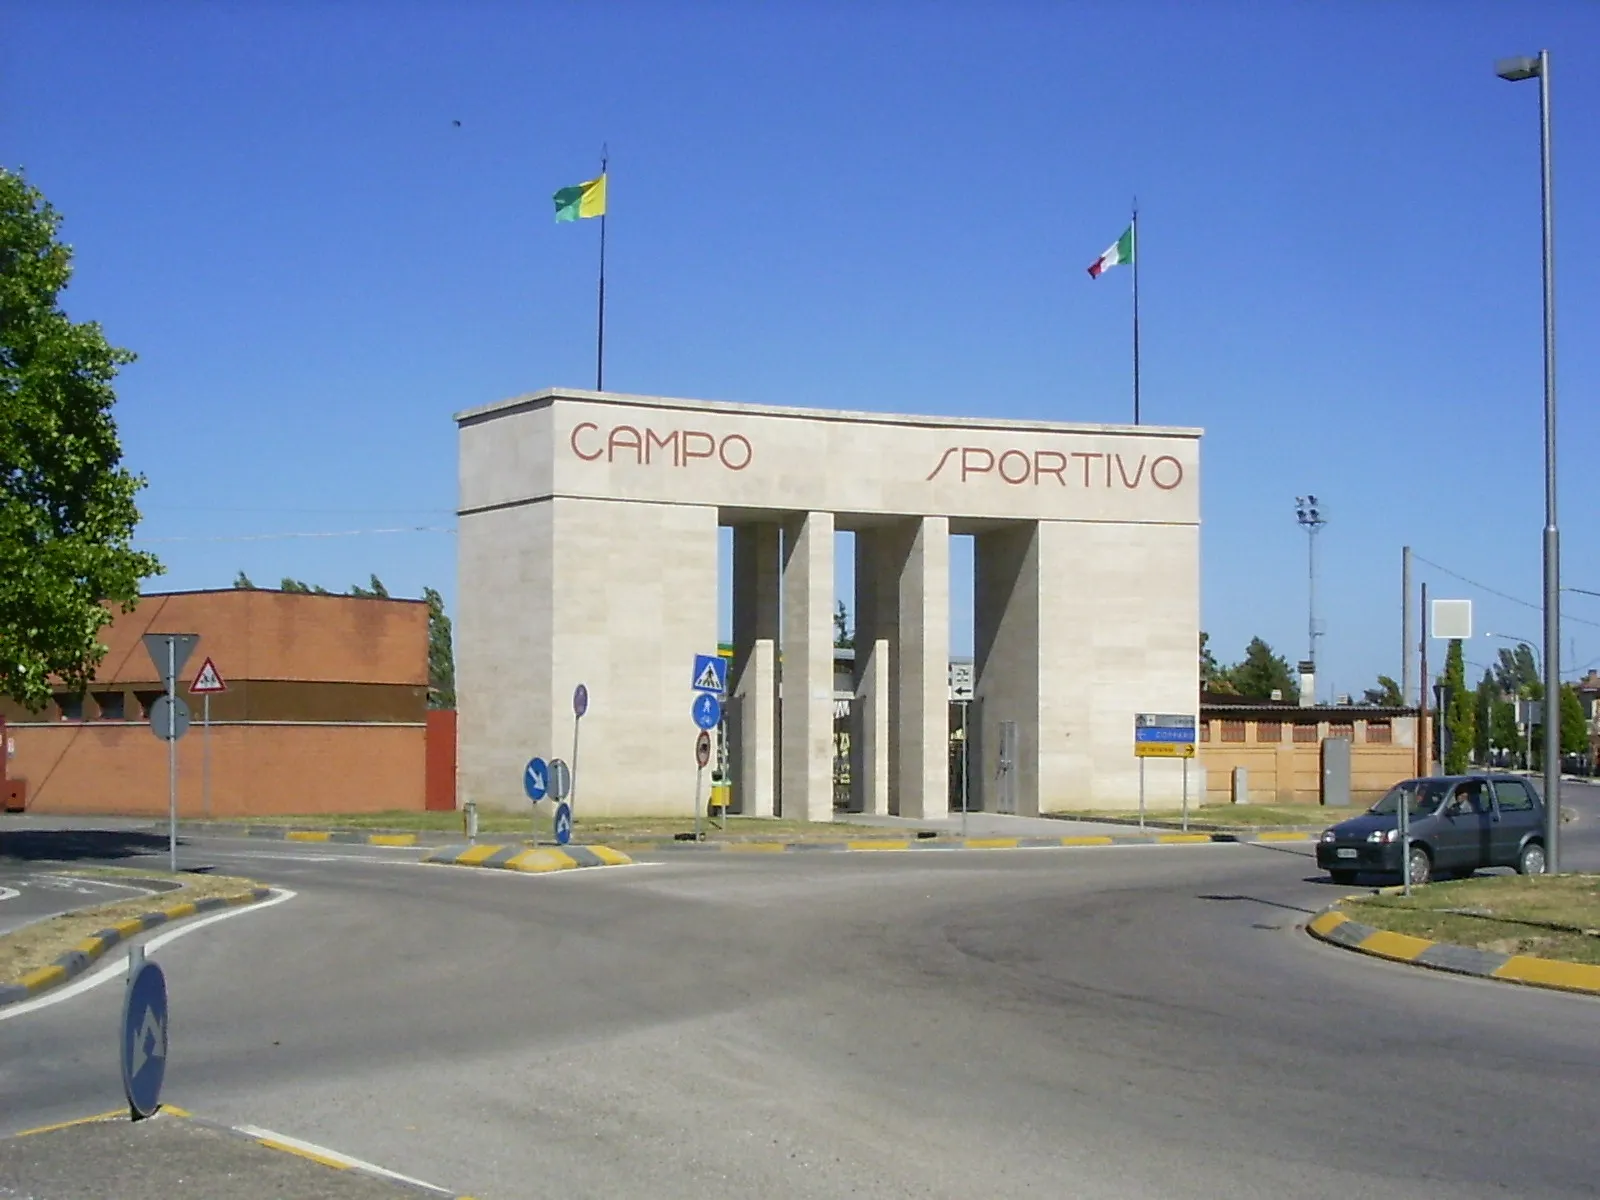 Photo showing: Tresigallo, entrance to the sports complex